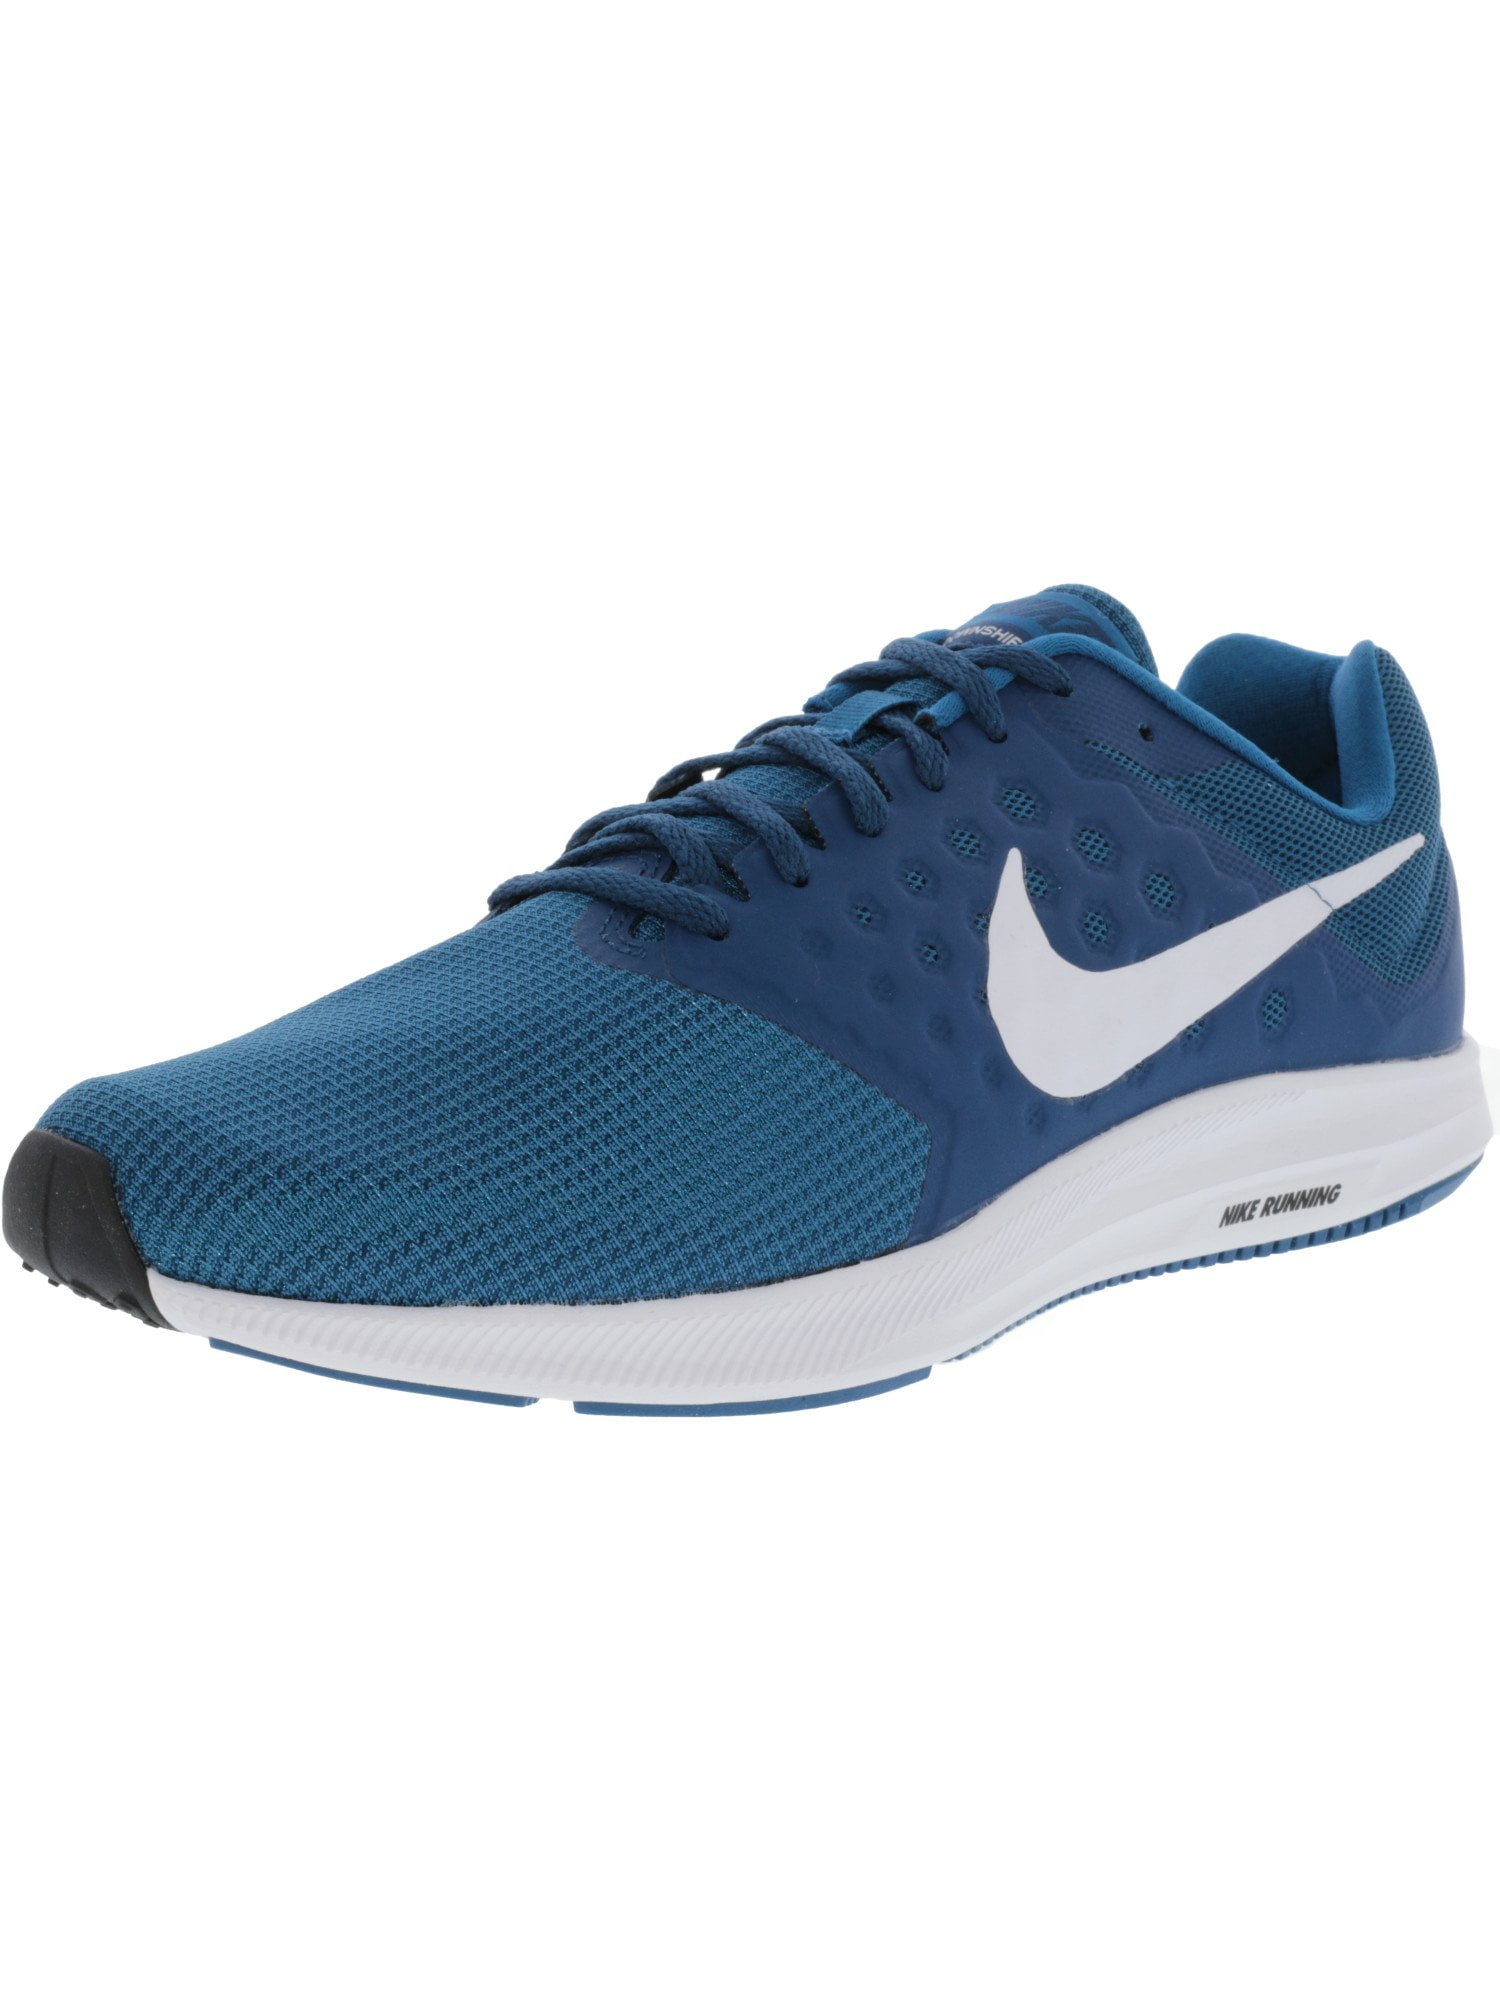 Nike Men's Downshifter 7 Green Abyss / White-Blue Force Ankle-High ...